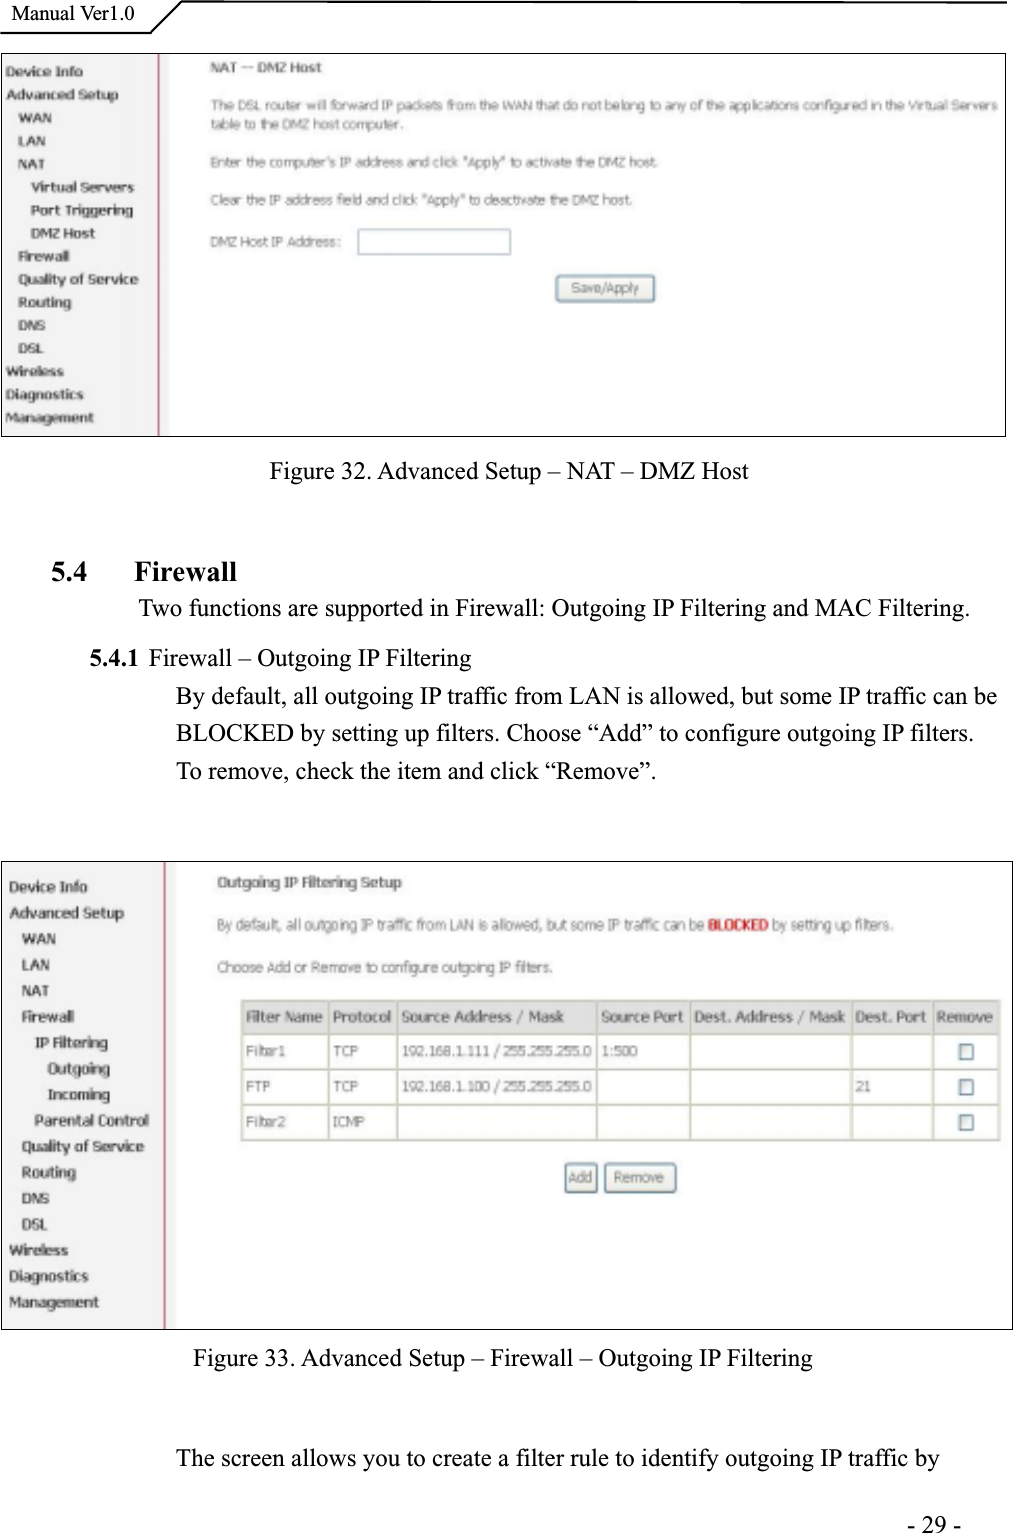  Manual Ver1.0Figure 32. Advanced Setup – NAT – DMZ Host 5.4 FirewallTwo functions are supported in Firewall: Outgoing IP Filtering and MAC Filtering. 5.4.1 Firewall – Outgoing IP FilteringBy default, all outgoing IP traffic from LAN is allowed, but some IP traffic can be BLOCKED by setting up filters. Choose “Add” to configure outgoing IP filters.To remove, check the item and click “Remove”.Figure 33. Advanced Setup – Firewall – Outgoing IP Filtering The screen allows you to create a filter rule to identify outgoing IP traffic by                                                                      -29-